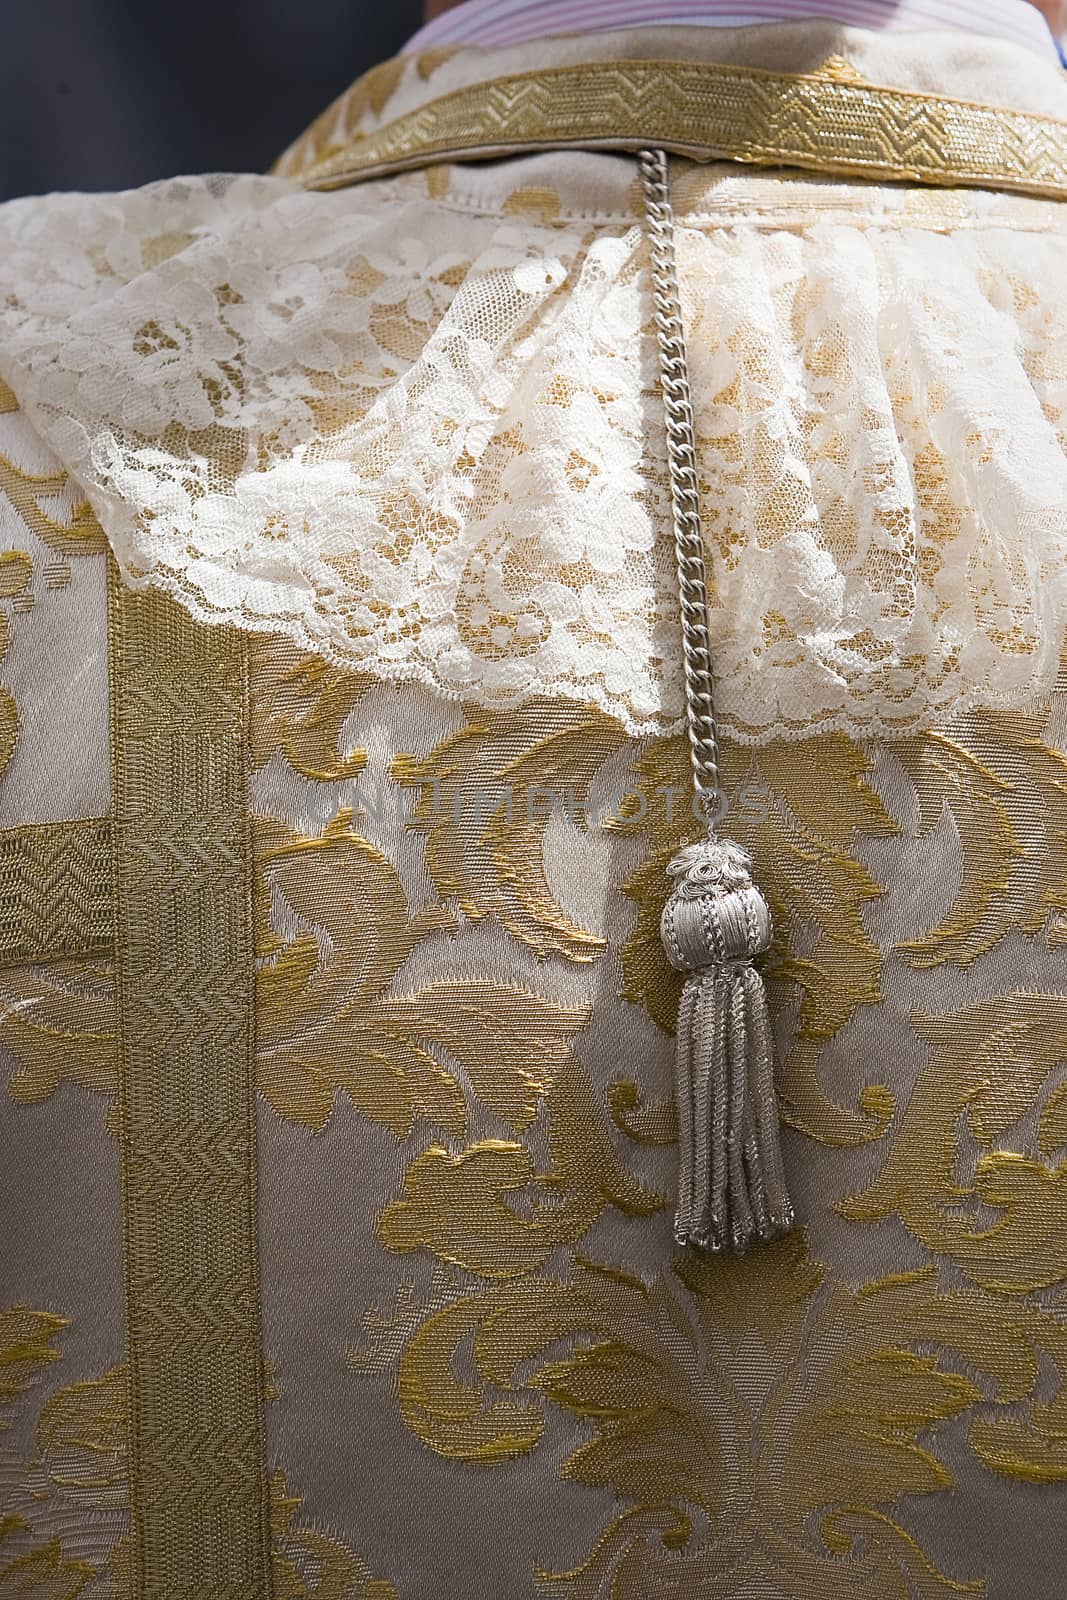 Detail of embroidery and tassel in a dalmatic, traditional dress of holy week in Spain